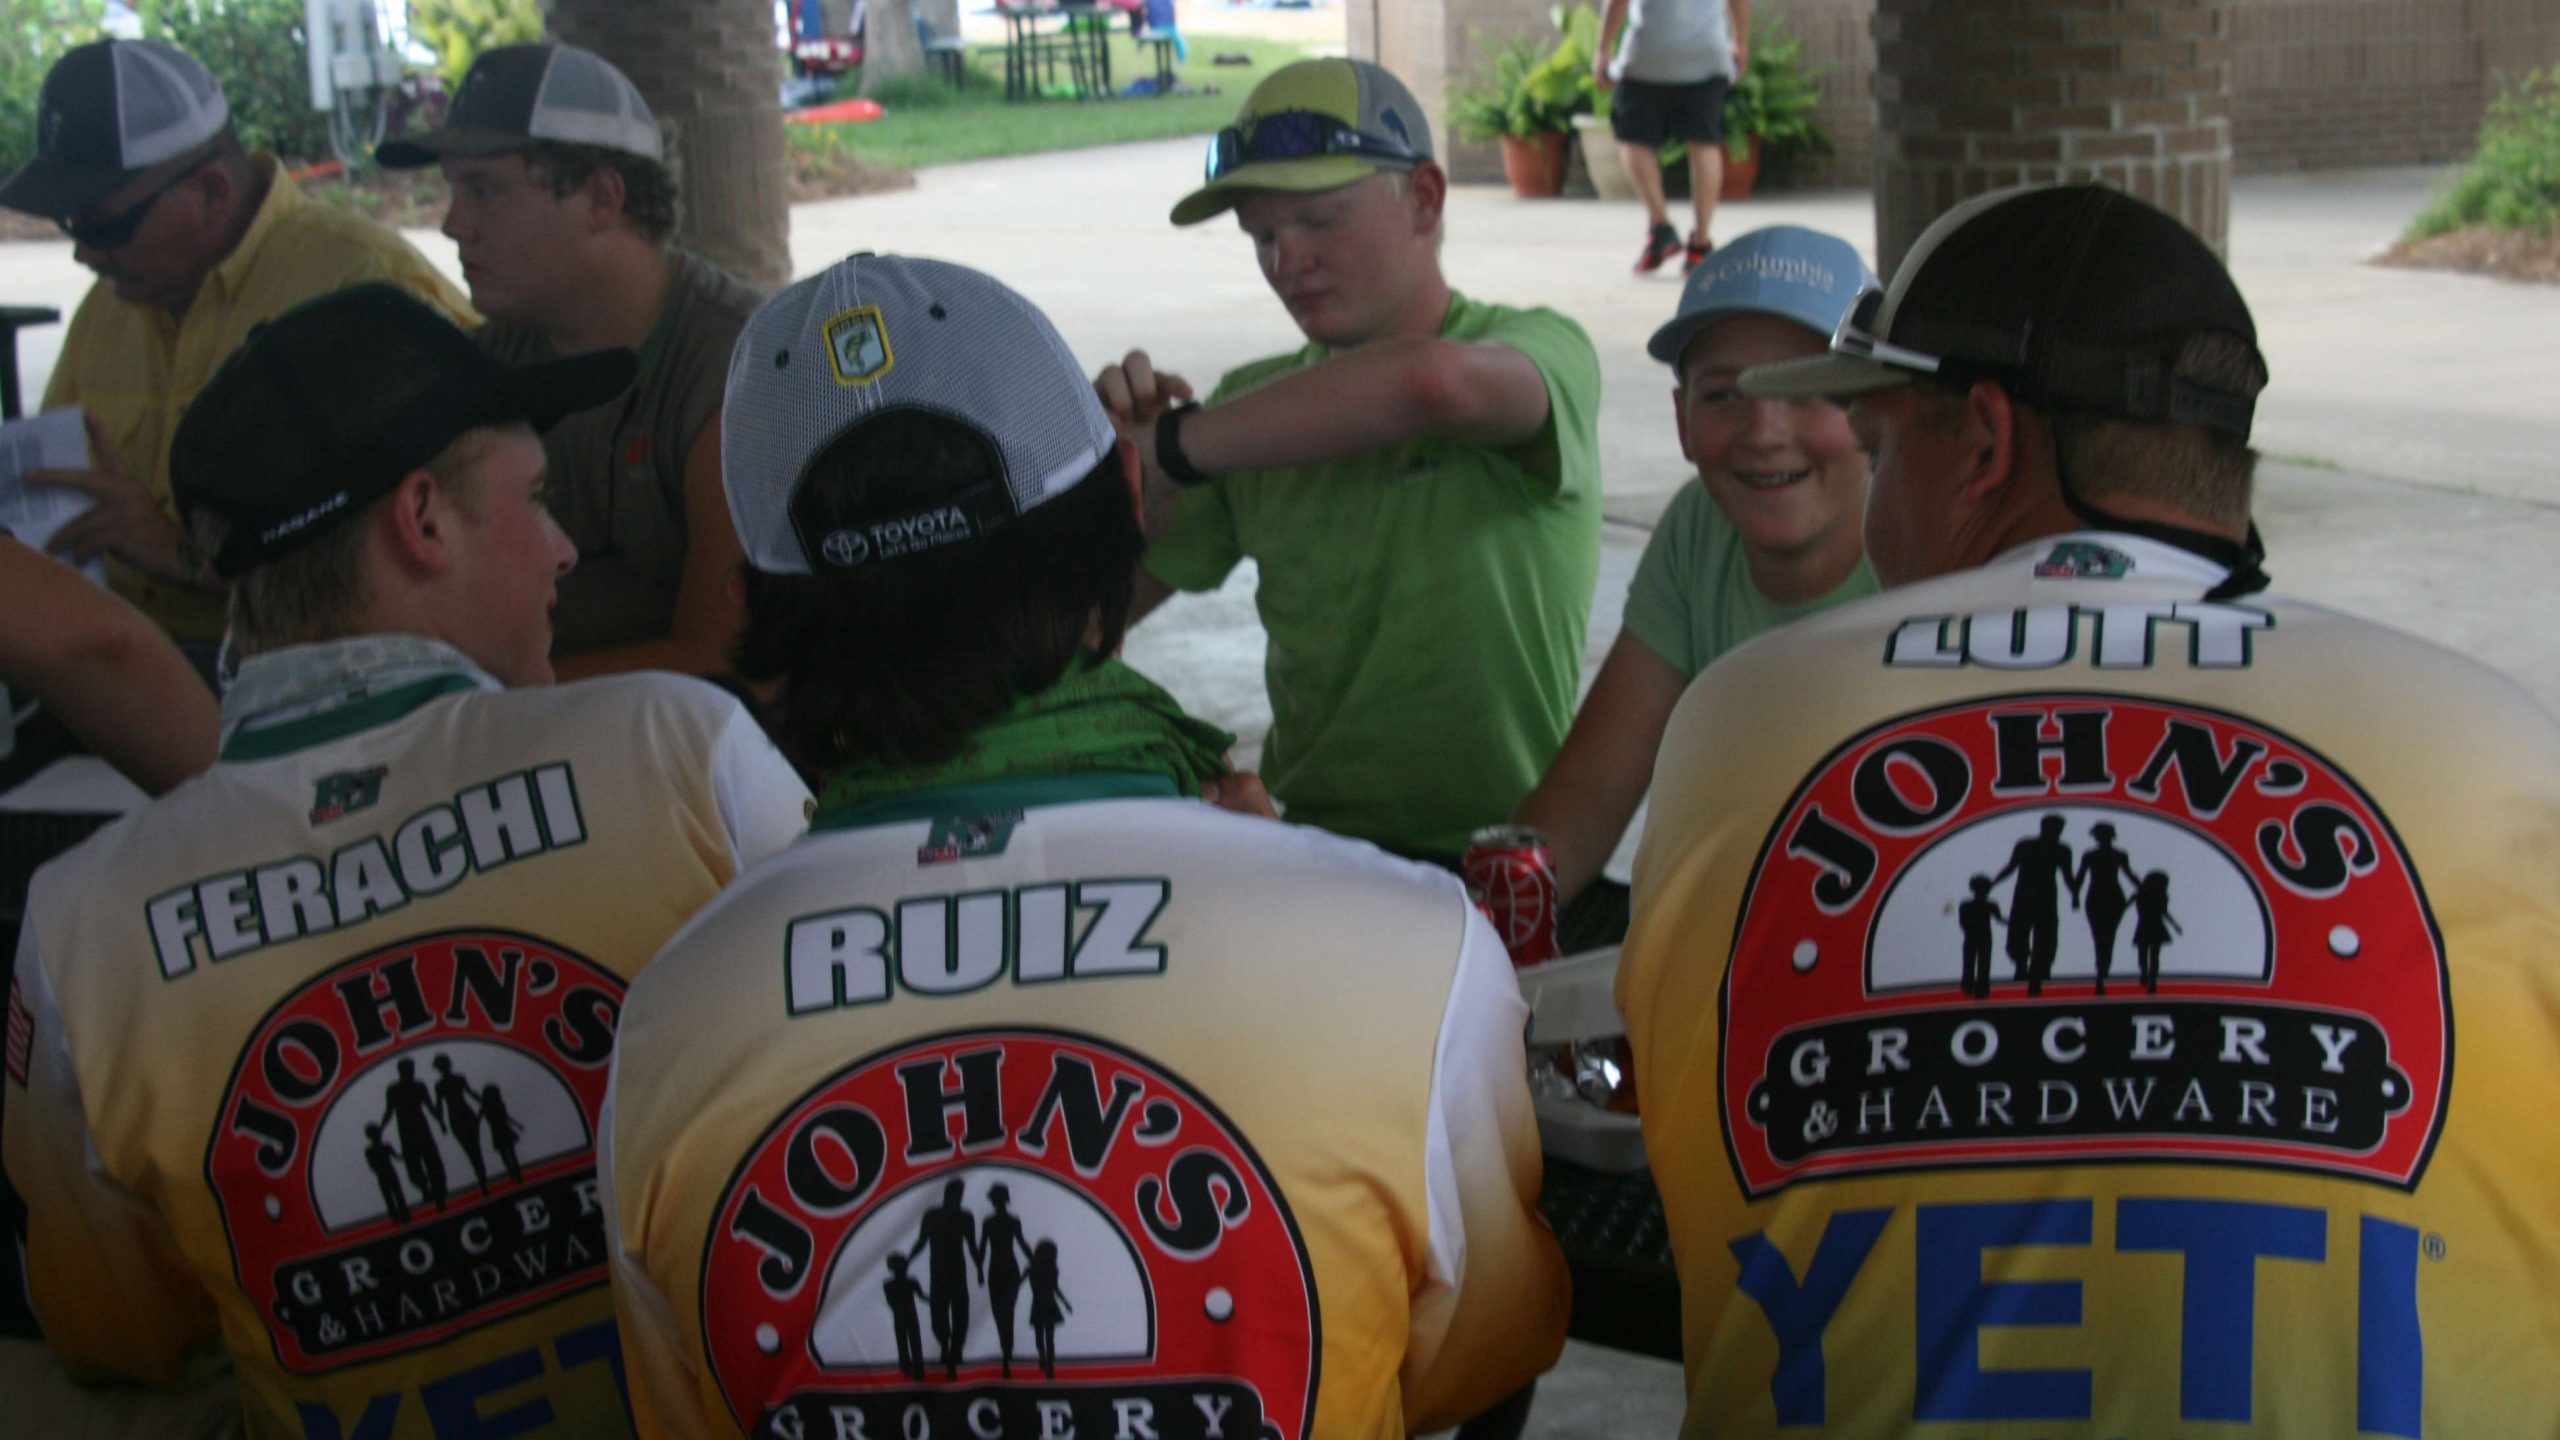 These three young anglers finished their lunches and chatted with fellow anglers as they awaited the anglers' meeting.